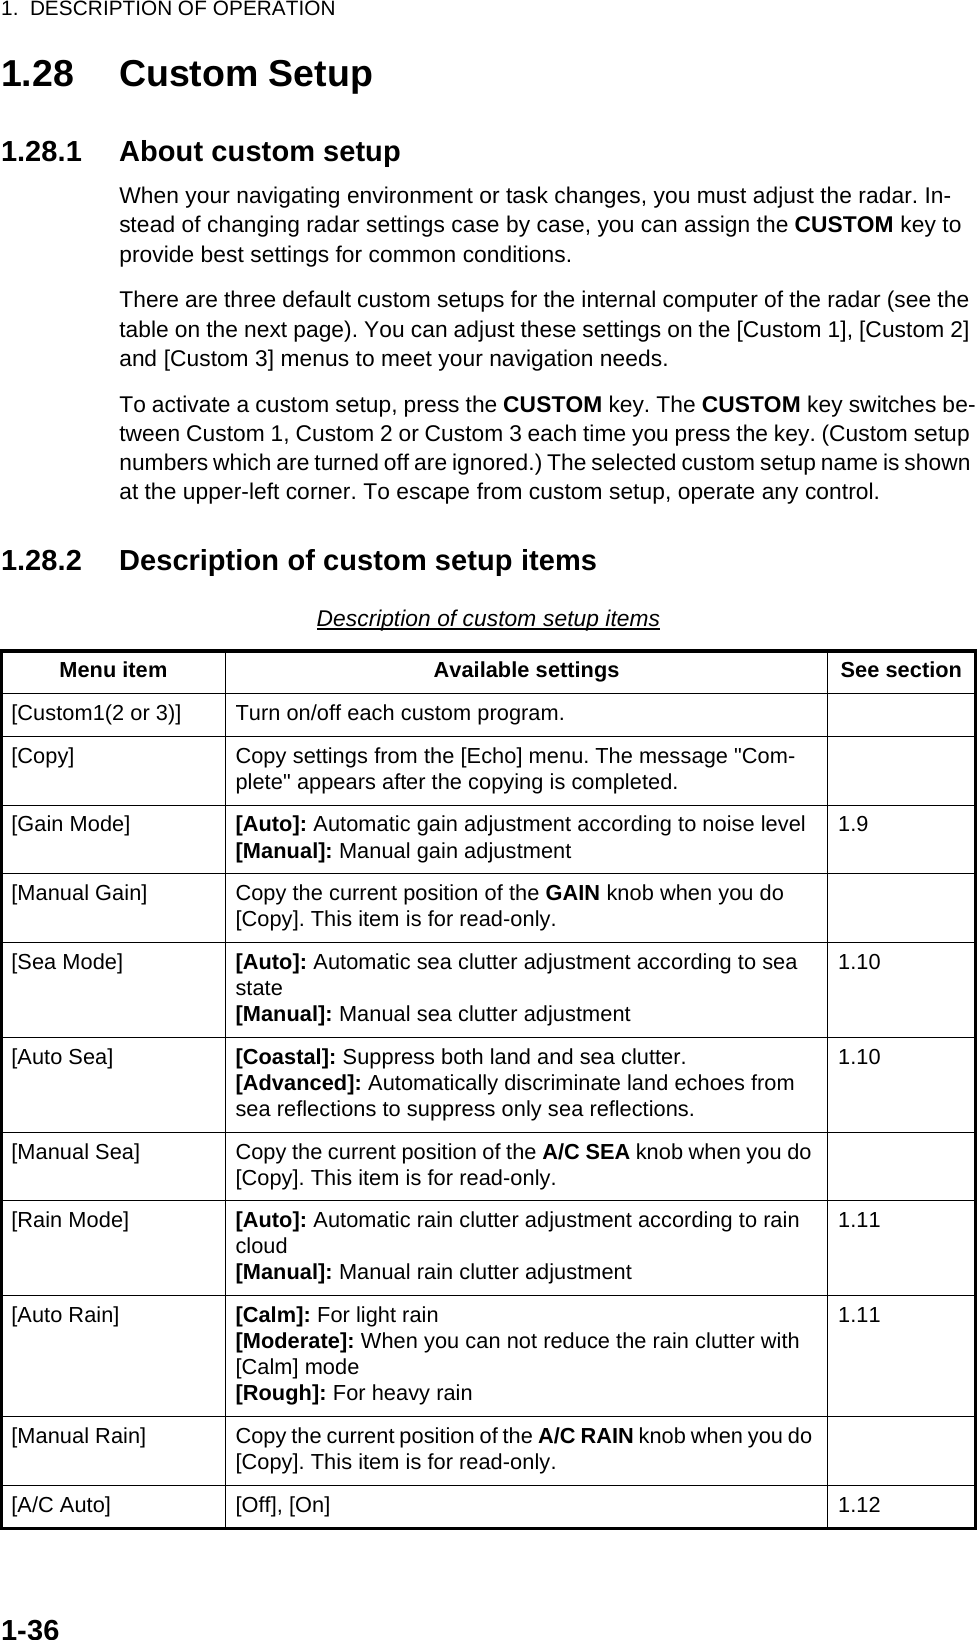 1.  DESCRIPTION OF OPERATION1-361.28 Custom Setup1.28.1 About custom setupWhen your navigating environment or task changes, you must adjust the radar. In-stead of changing radar settings case by case, you can assign the CUSTOM key to provide best settings for common conditions.There are three default custom setups for the internal computer of the radar (see the table on the next page). You can adjust these settings on the [Custom 1], [Custom 2] and [Custom 3] menus to meet your navigation needs.To activate a custom setup, press the CUSTOM key. The CUSTOM key switches be-tween Custom 1, Custom 2 or Custom 3 each time you press the key. (Custom setup numbers which are turned off are ignored.) The selected custom setup name is shown at the upper-left corner. To escape from custom setup, operate any control.1.28.2 Description of custom setup itemsDescription of custom setup itemsMenu item Available settings See section[Custom1(2 or 3)] Turn on/off each custom program.[Copy] Copy settings from the [Echo] menu. The message &quot;Com-plete&quot; appears after the copying is completed.[Gain Mode] [Auto]: Automatic gain adjustment according to noise level[Manual]: Manual gain adjustment 1.9[Manual Gain] Copy the current position of the GAIN knob when you do [Copy]. This item is for read-only.[Sea Mode] [Auto]: Automatic sea clutter adjustment according to sea state[Manual]: Manual sea clutter adjustment1.10[Auto Sea] [Coastal]: Suppress both land and sea clutter.[Advanced]: Automatically discriminate land echoes from sea reflections to suppress only sea reflections.1.10[Manual Sea] Copy the current position of the A/C SEA knob when you do [Copy]. This item is for read-only.[Rain Mode] [Auto]: Automatic rain clutter adjustment according to rain cloud[Manual]: Manual rain clutter adjustment1.11[Auto Rain] [Calm]: For light rain[Moderate]: When you can not reduce the rain clutter with [Calm] mode[Rough]: For heavy rain1.11[Manual Rain] Copy the current position of the A/C RAIN knob when you do [Copy]. This item is for read-only.[A/C Auto] [Off], [On] 1.12